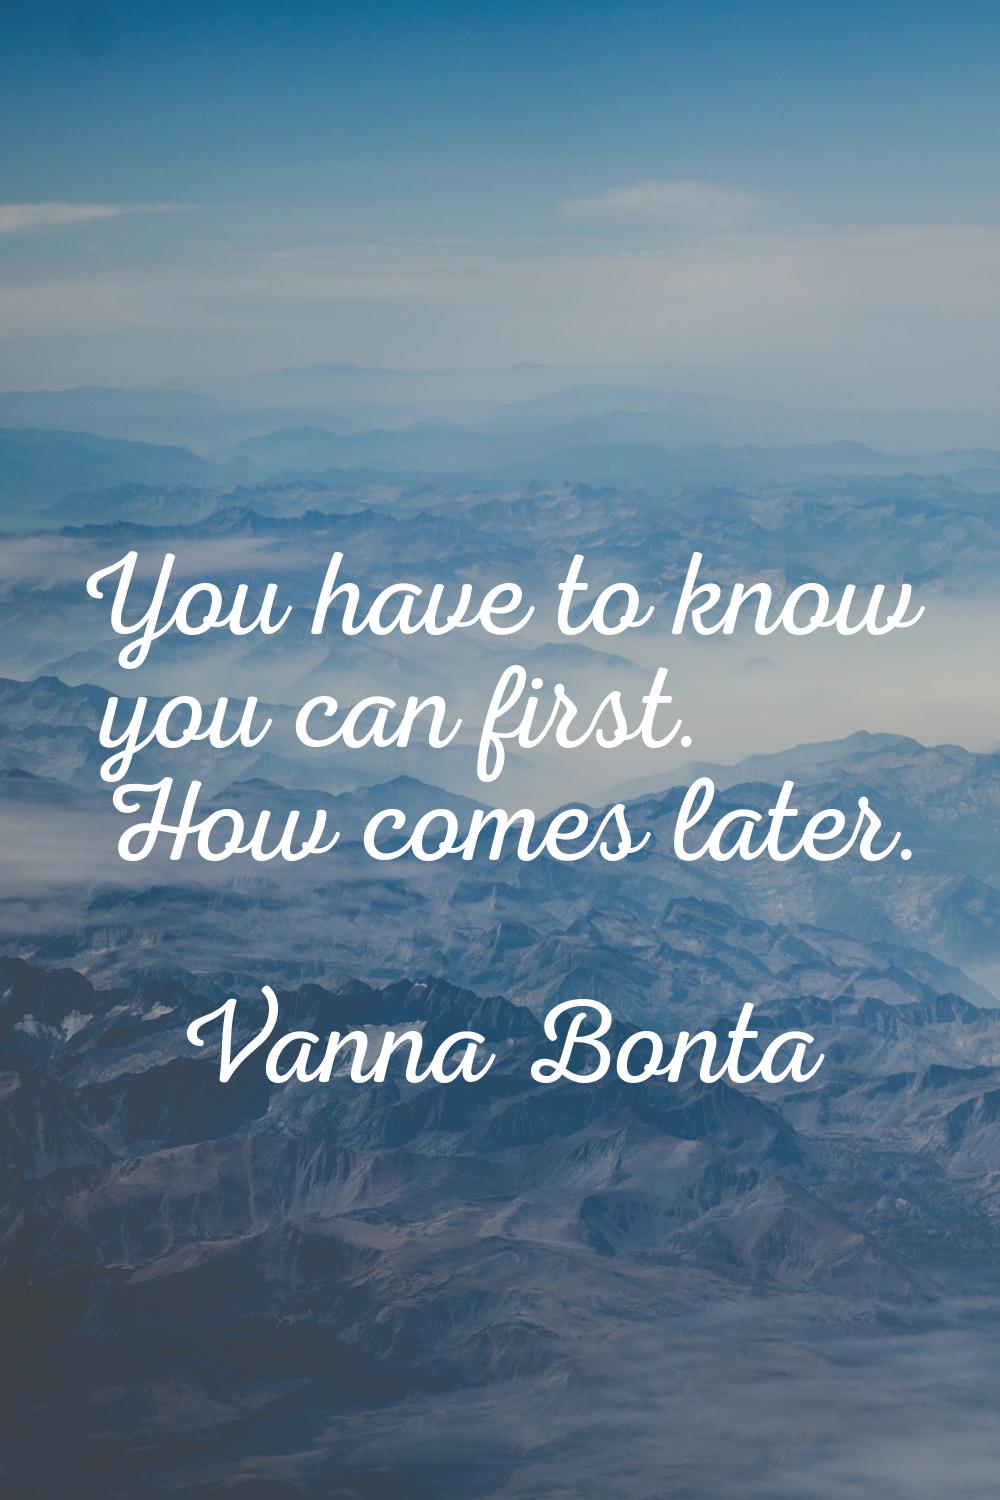 You have to know you can first. How comes later.